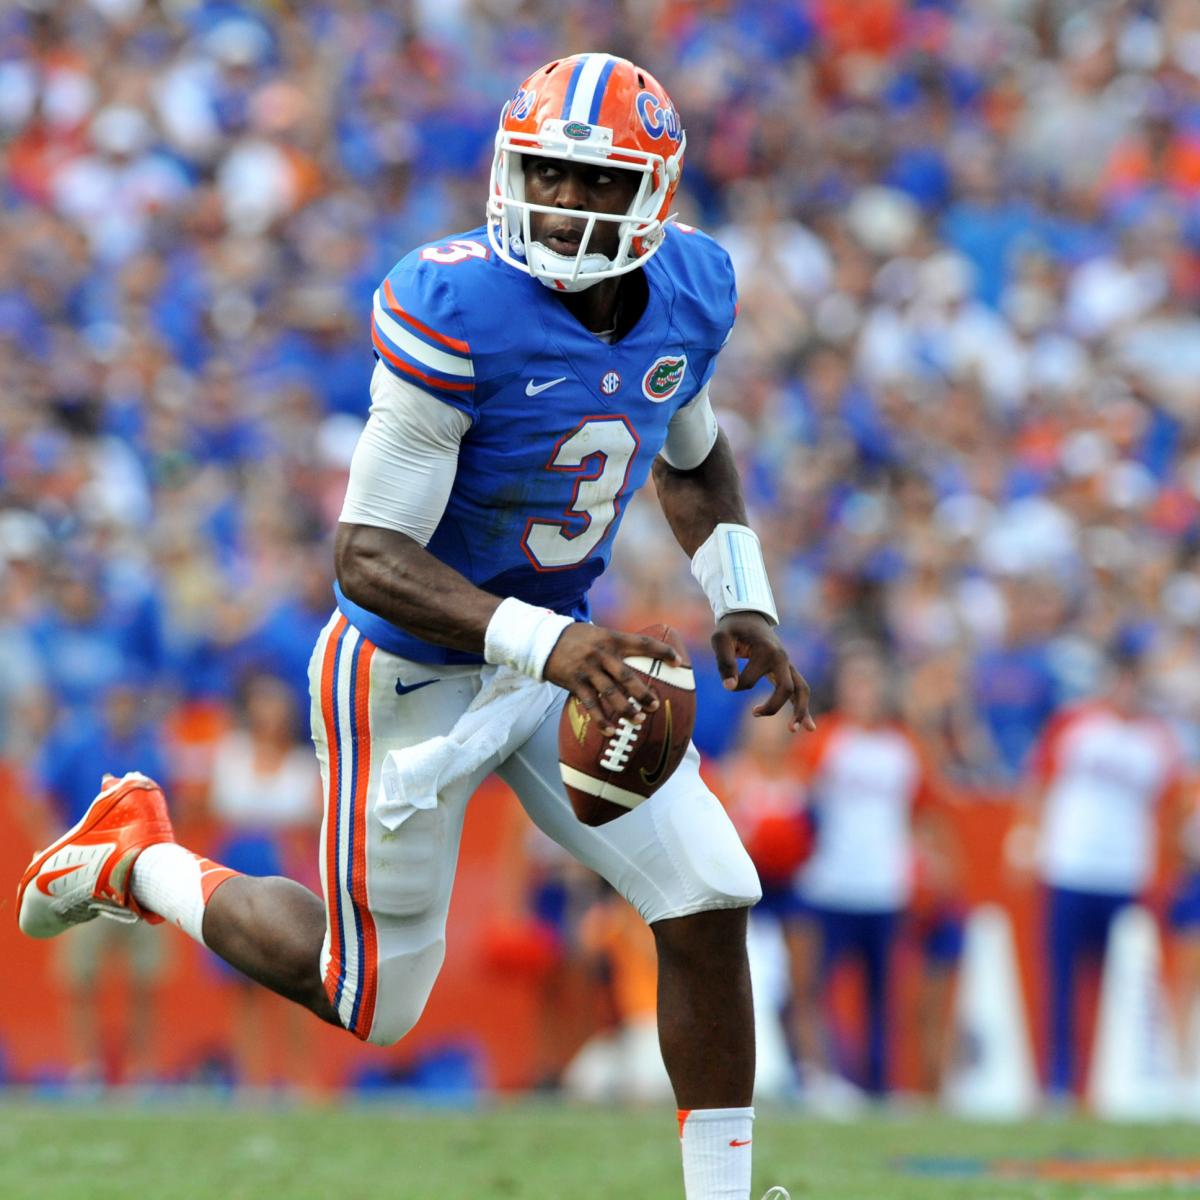 Tennessee vs. Florida Live Score and Highlights News, Scores